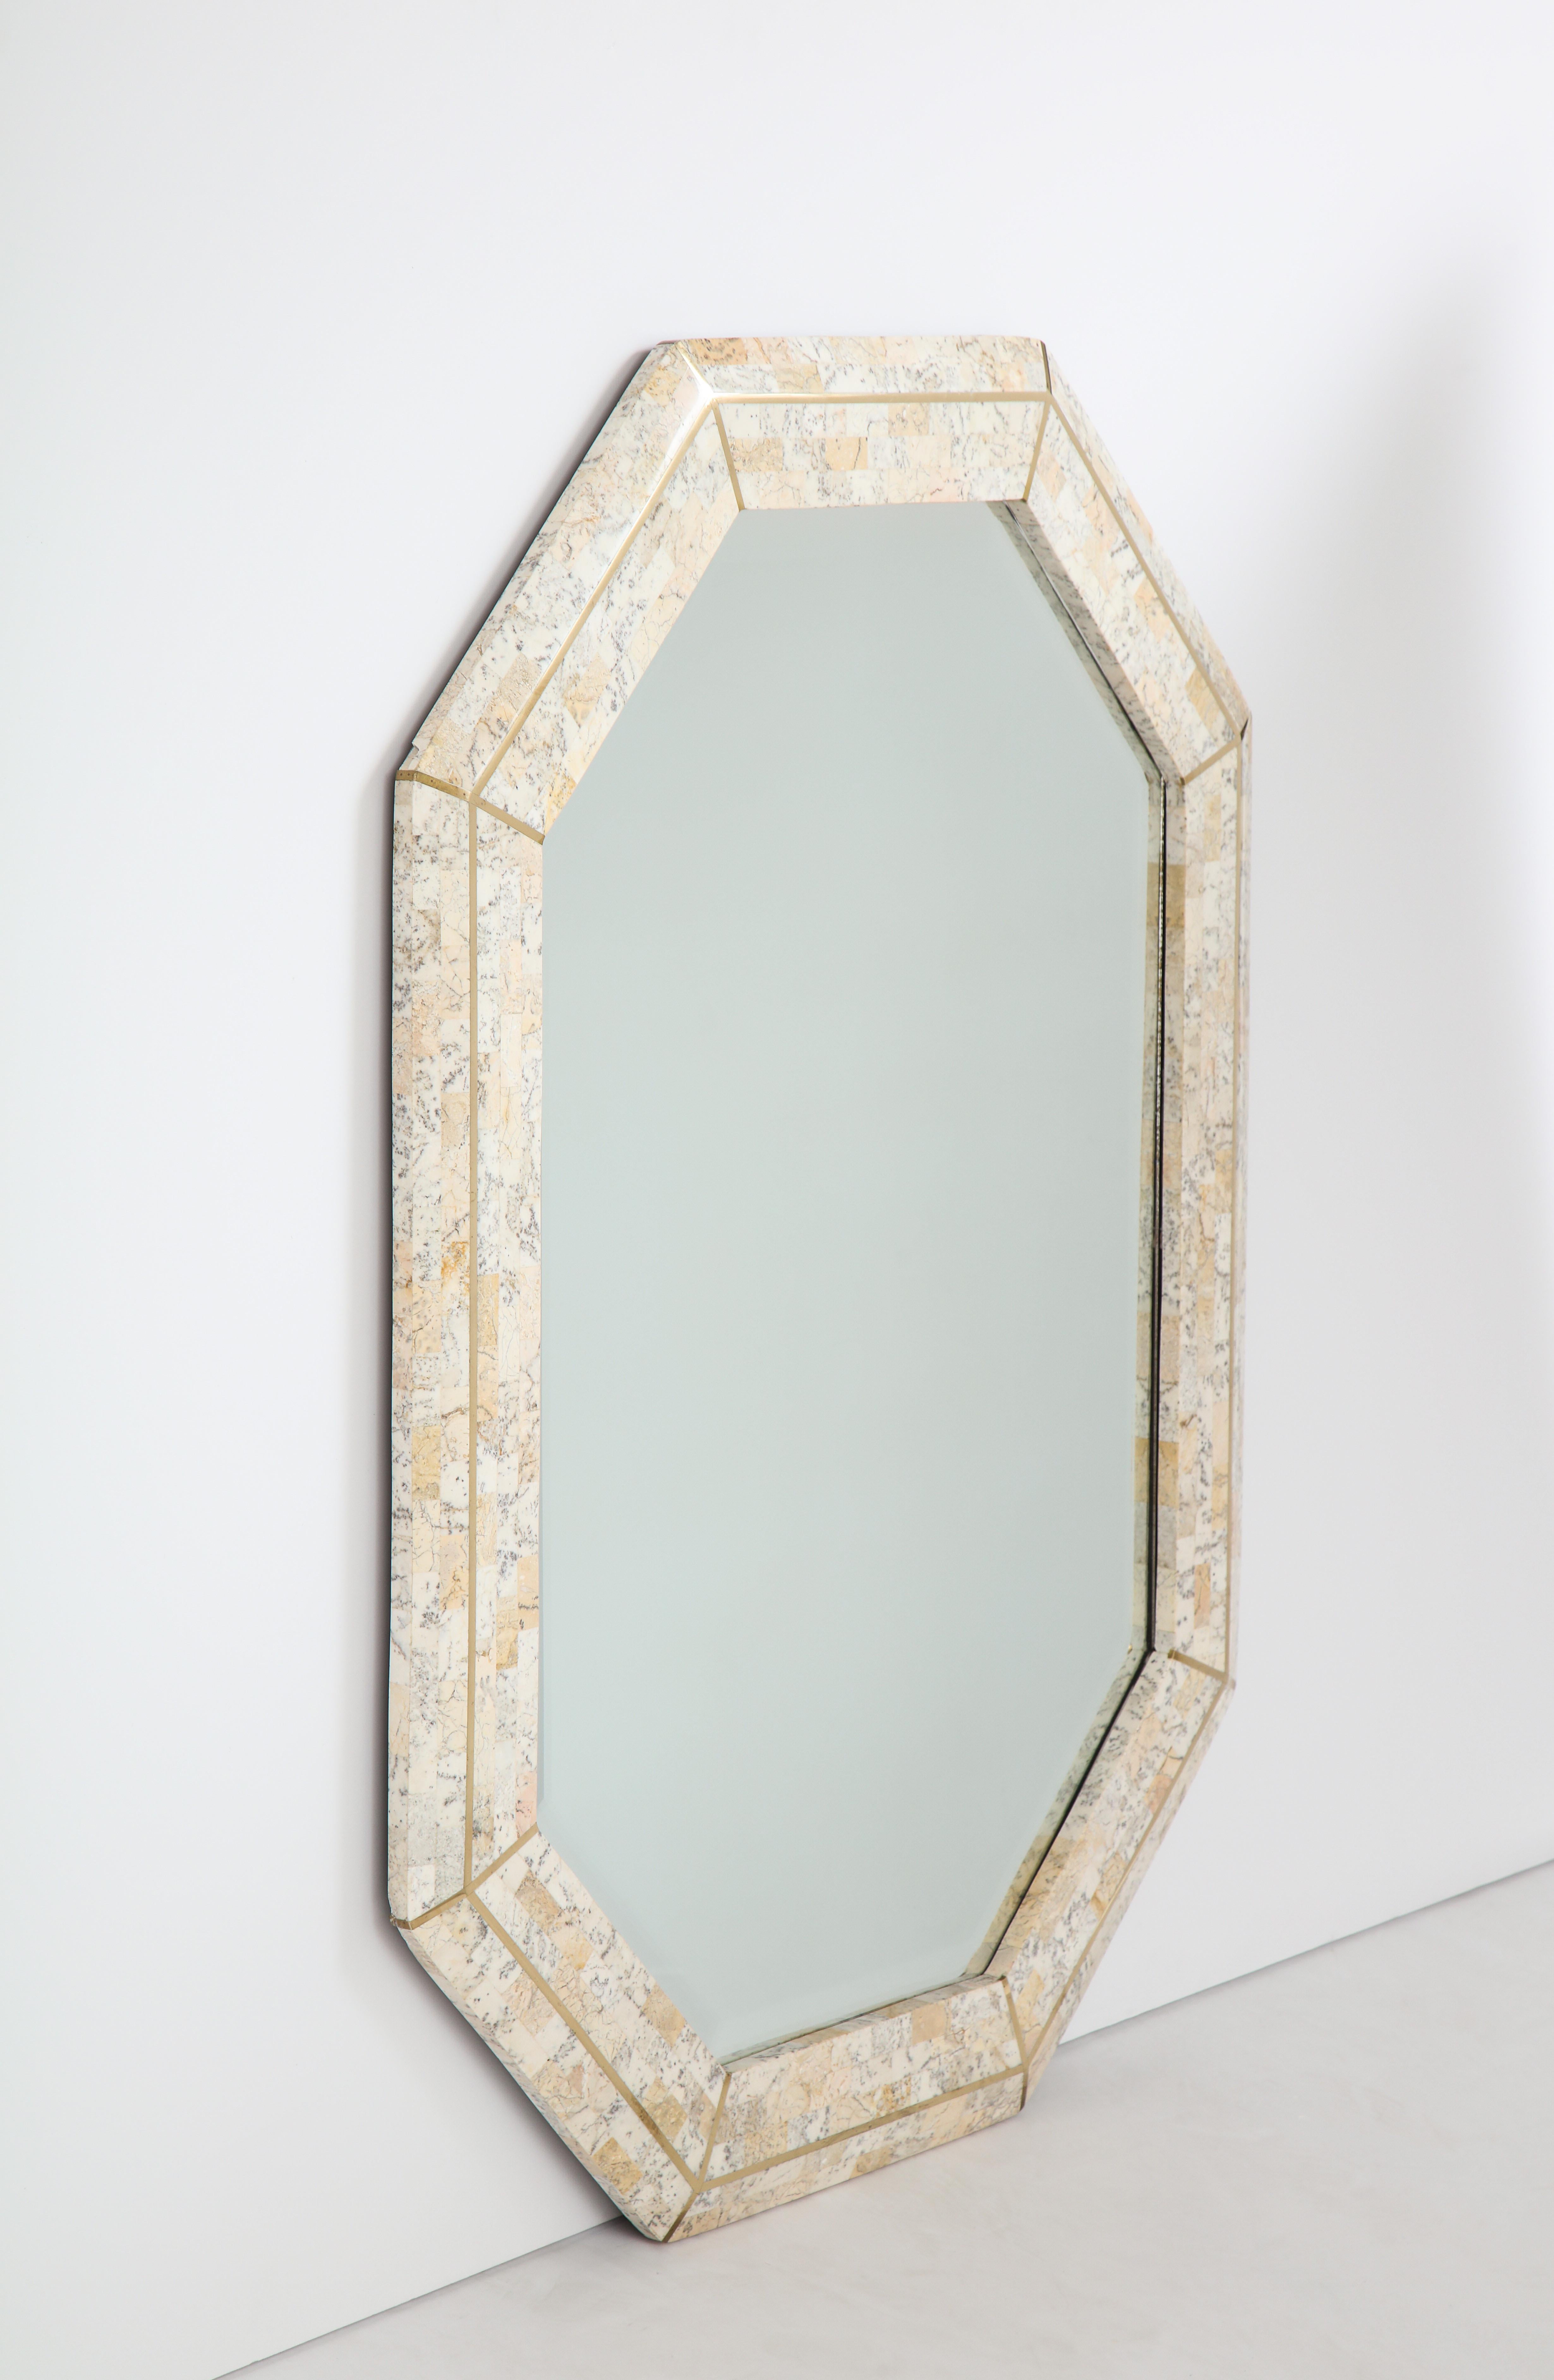 Maitland Smith octagonal tessellated stone and inlaid brass mirror 
Philippines, circa 1980.
Size: 40 1/2